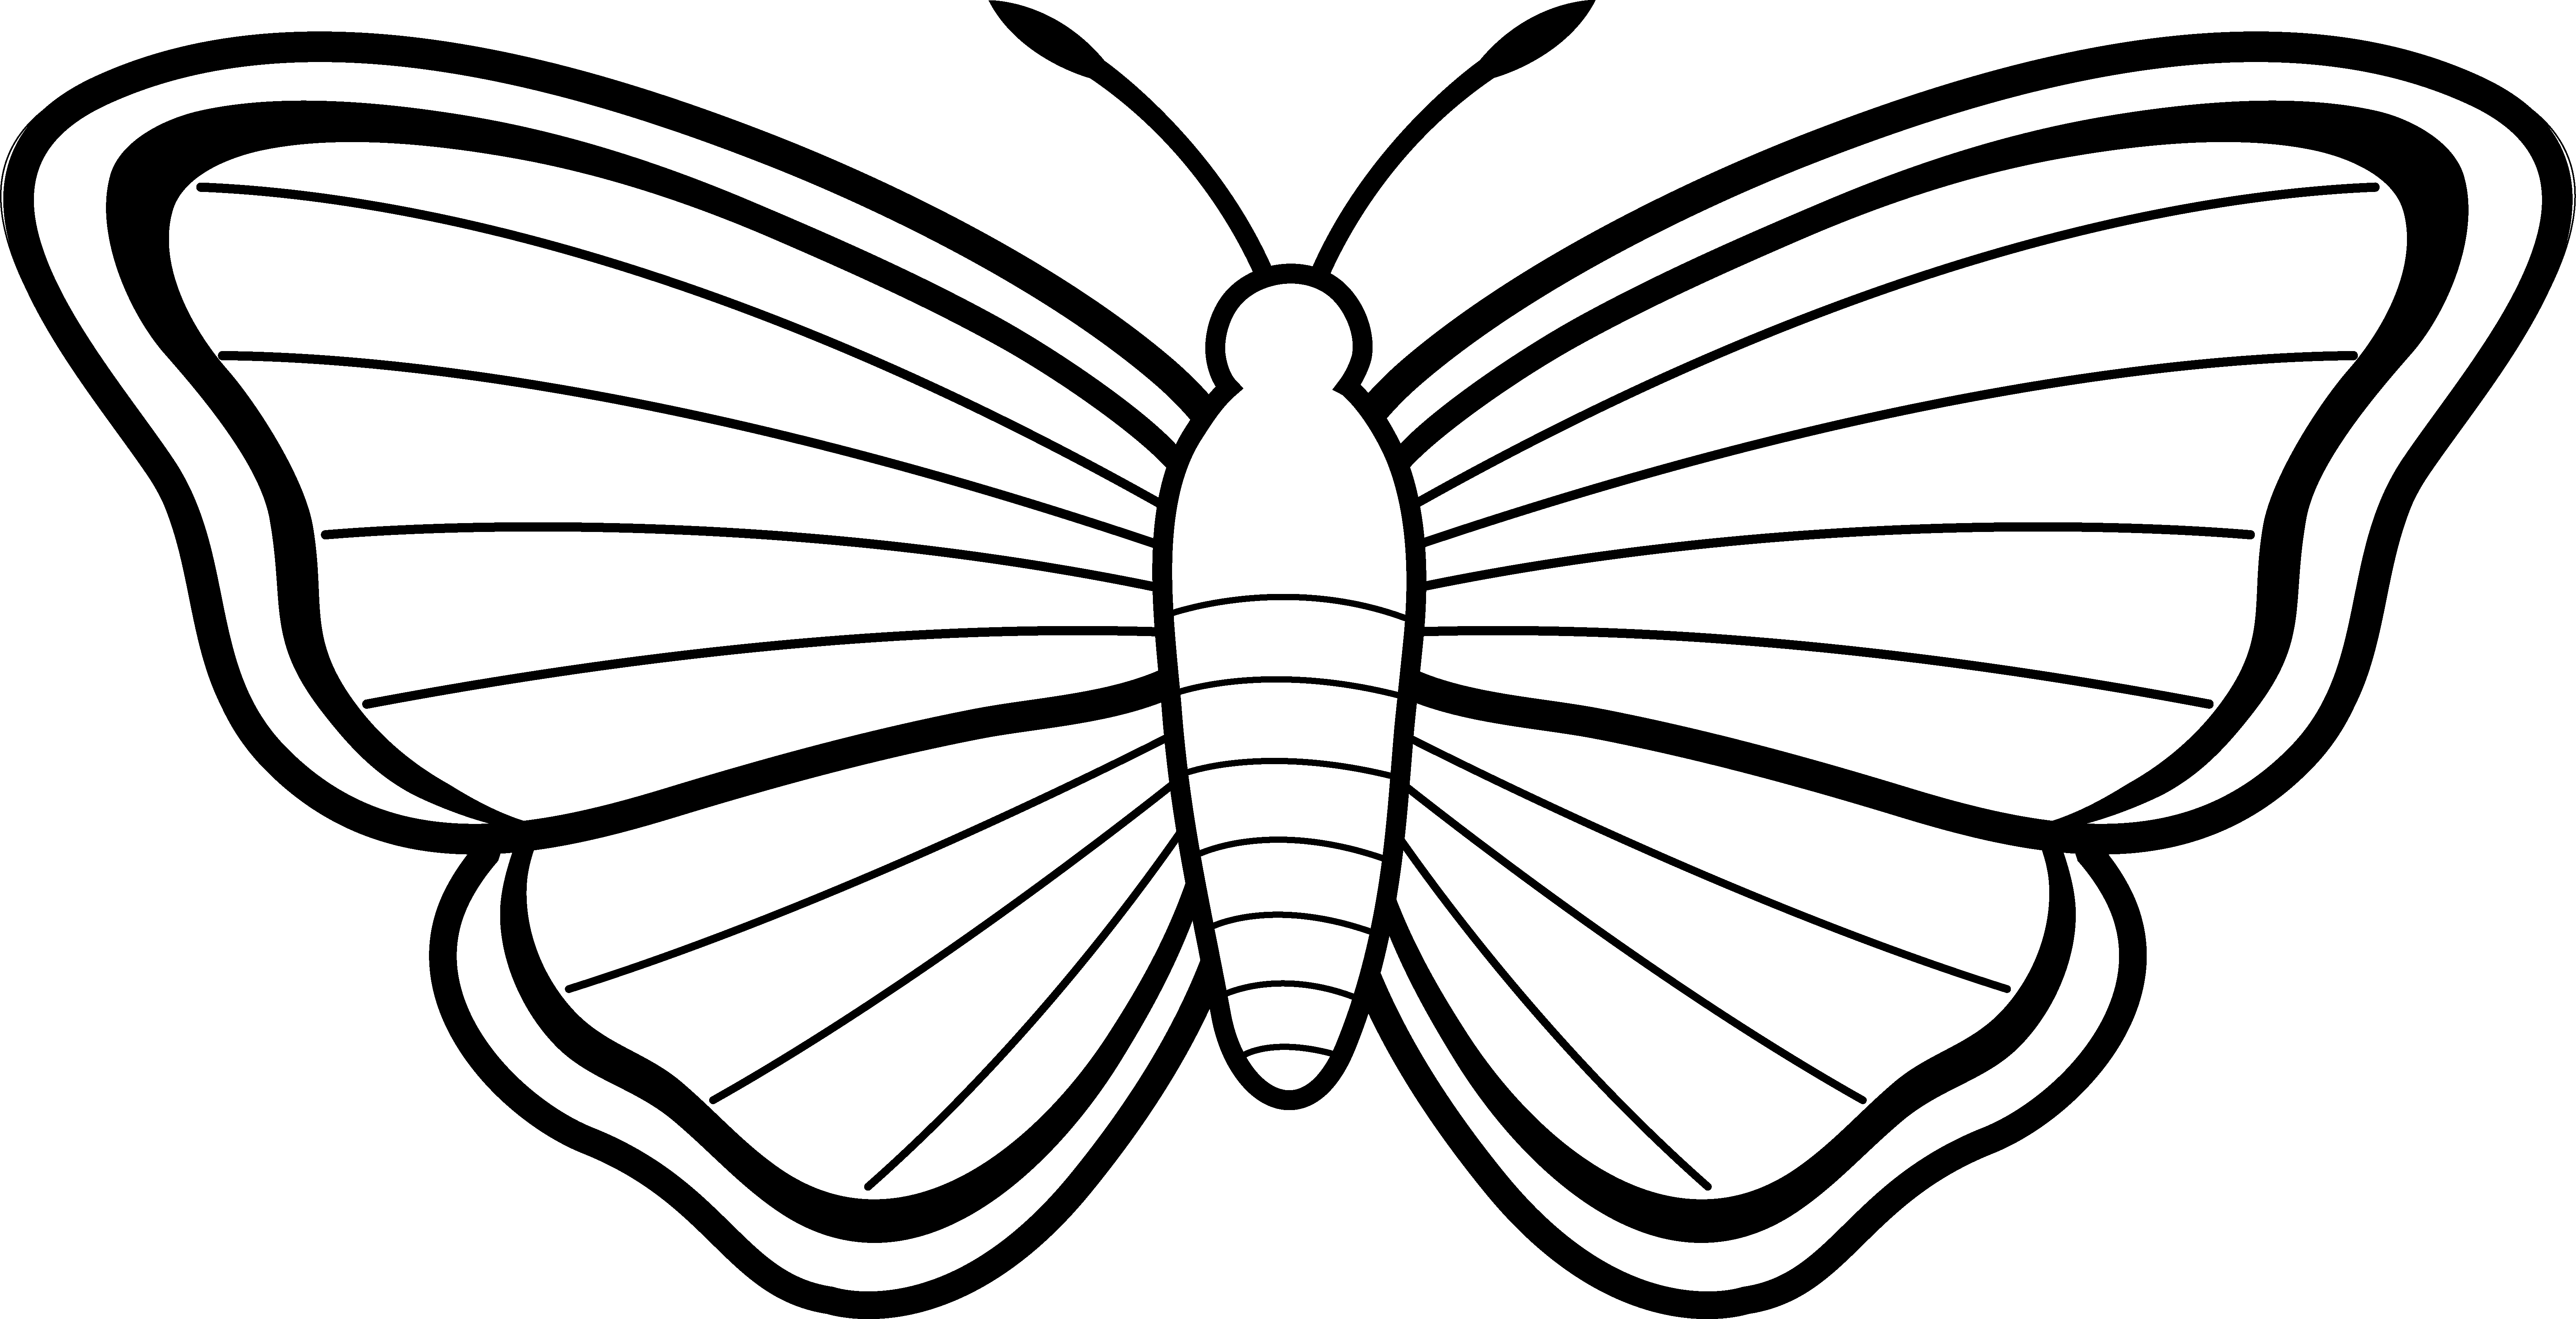 Insect clipart line art. Free butterflies black and